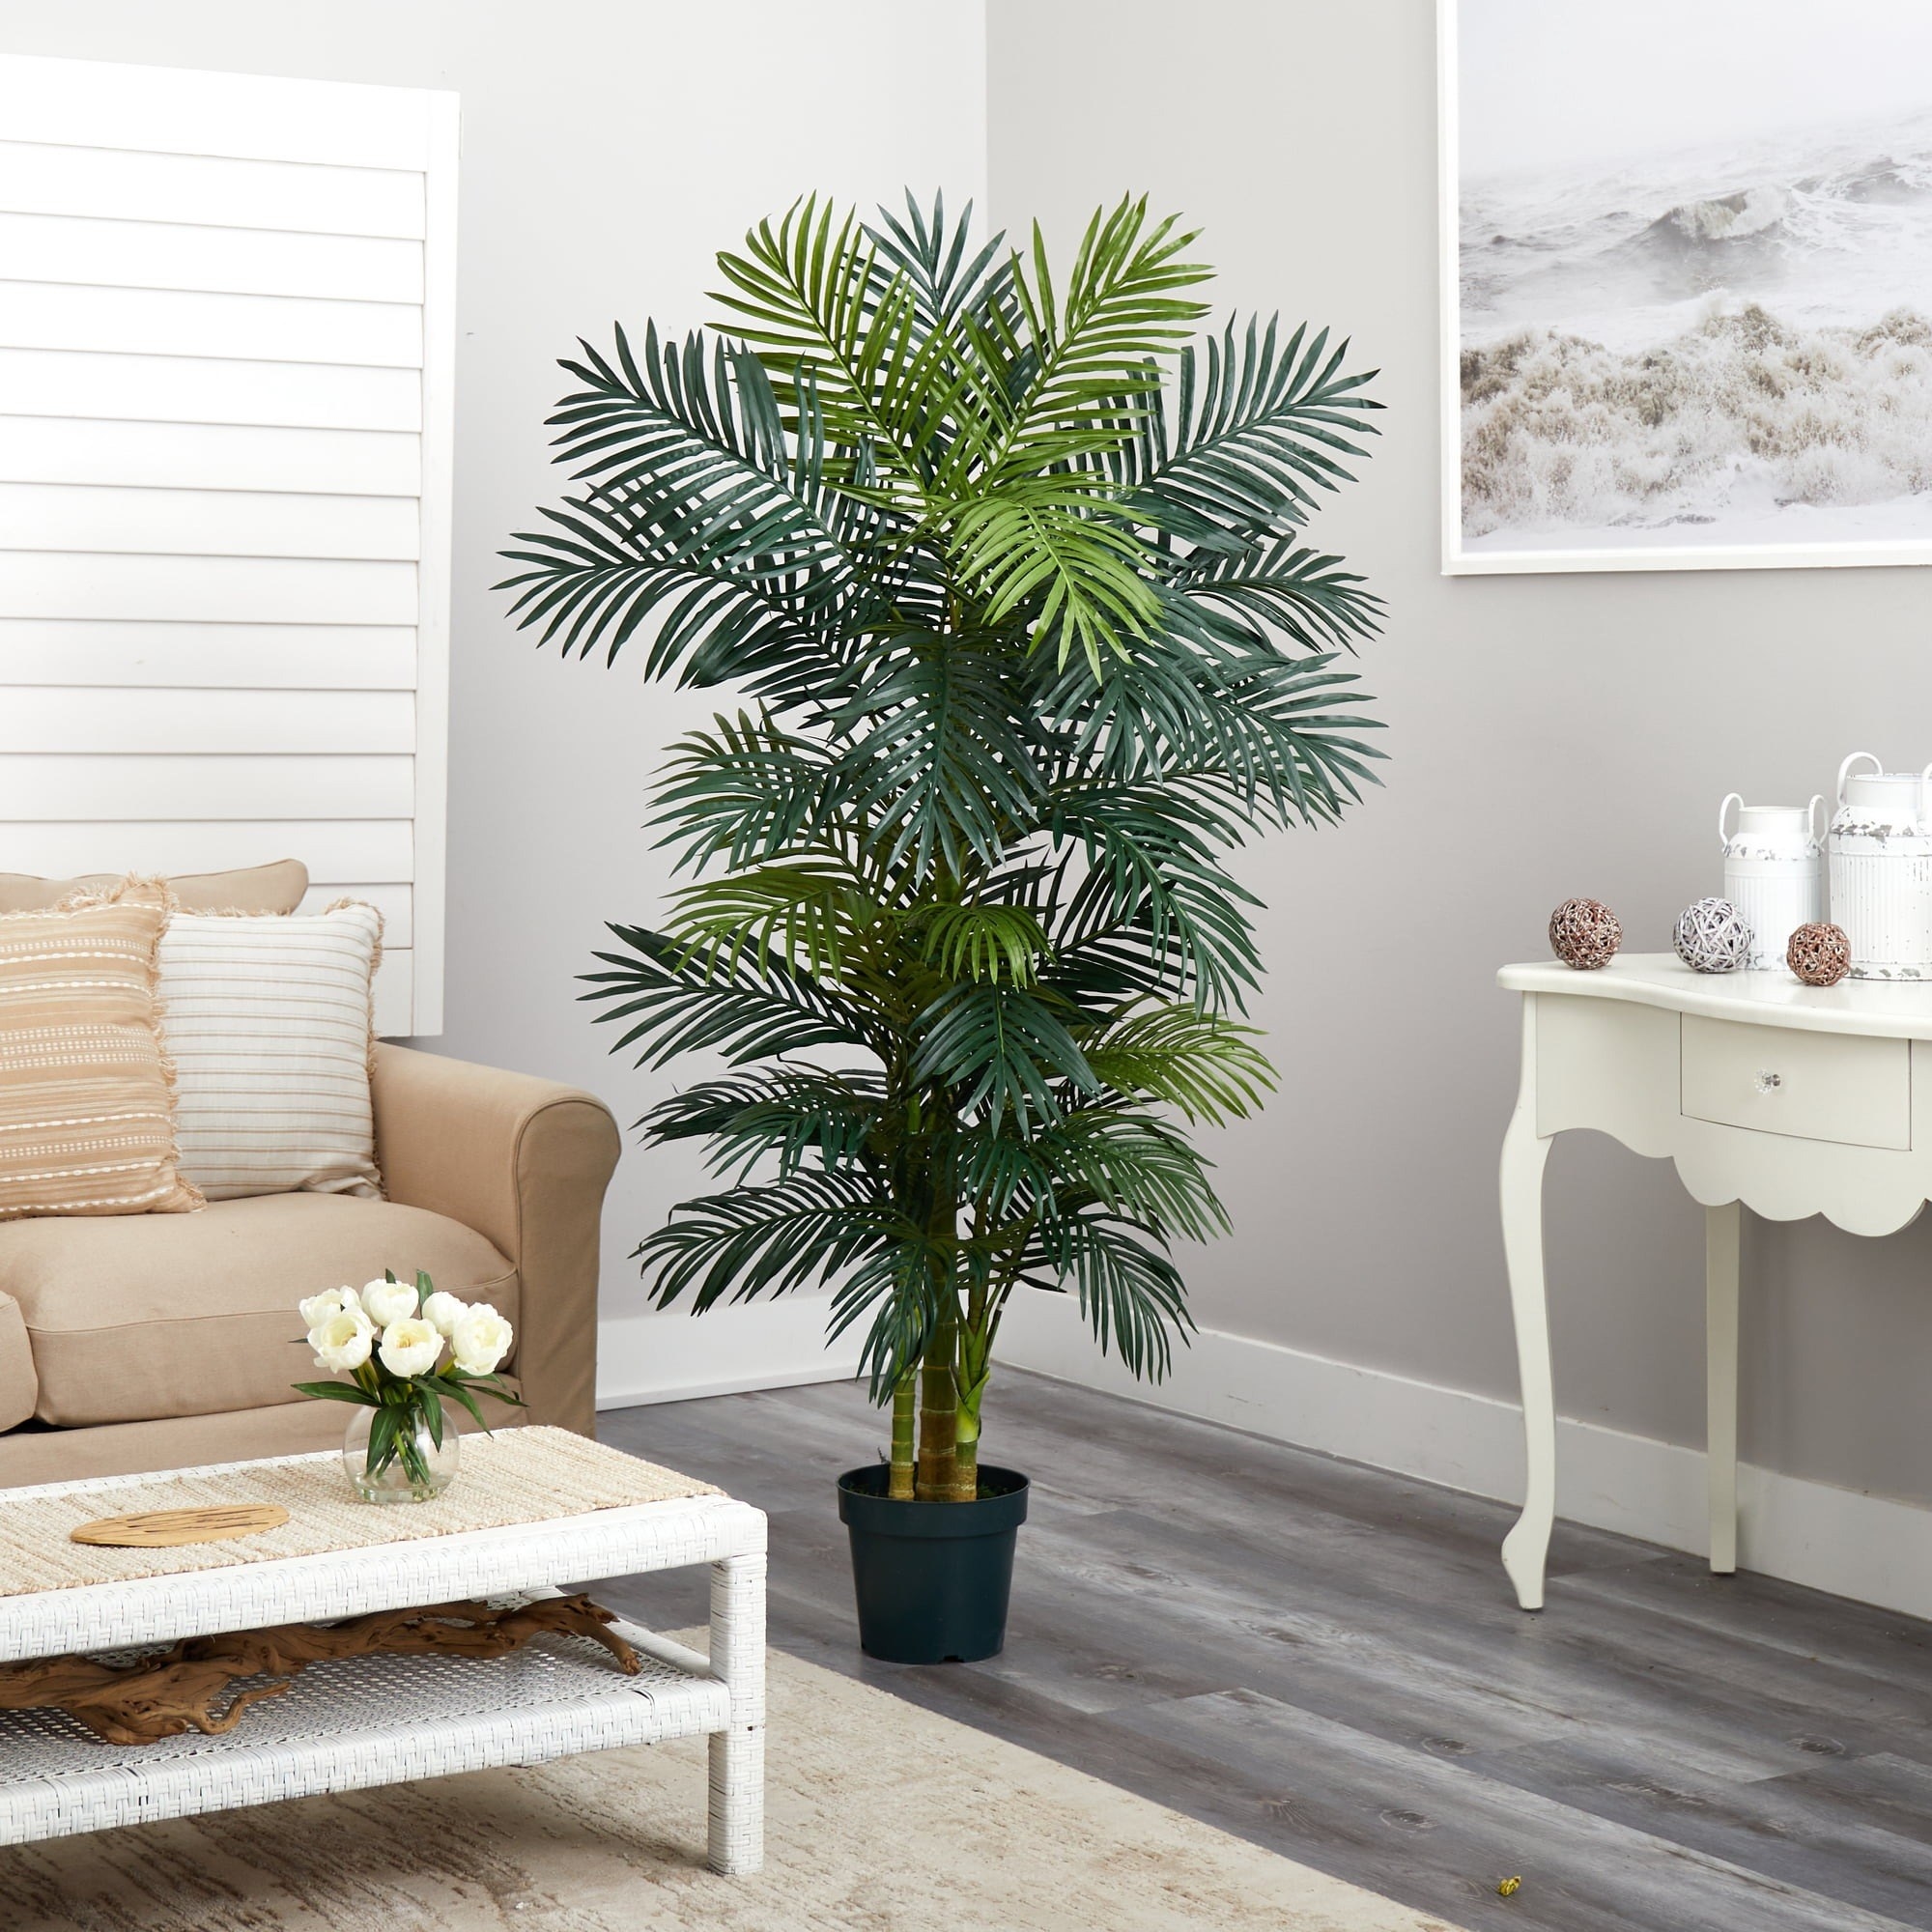 the palm tree with many leaves in a room